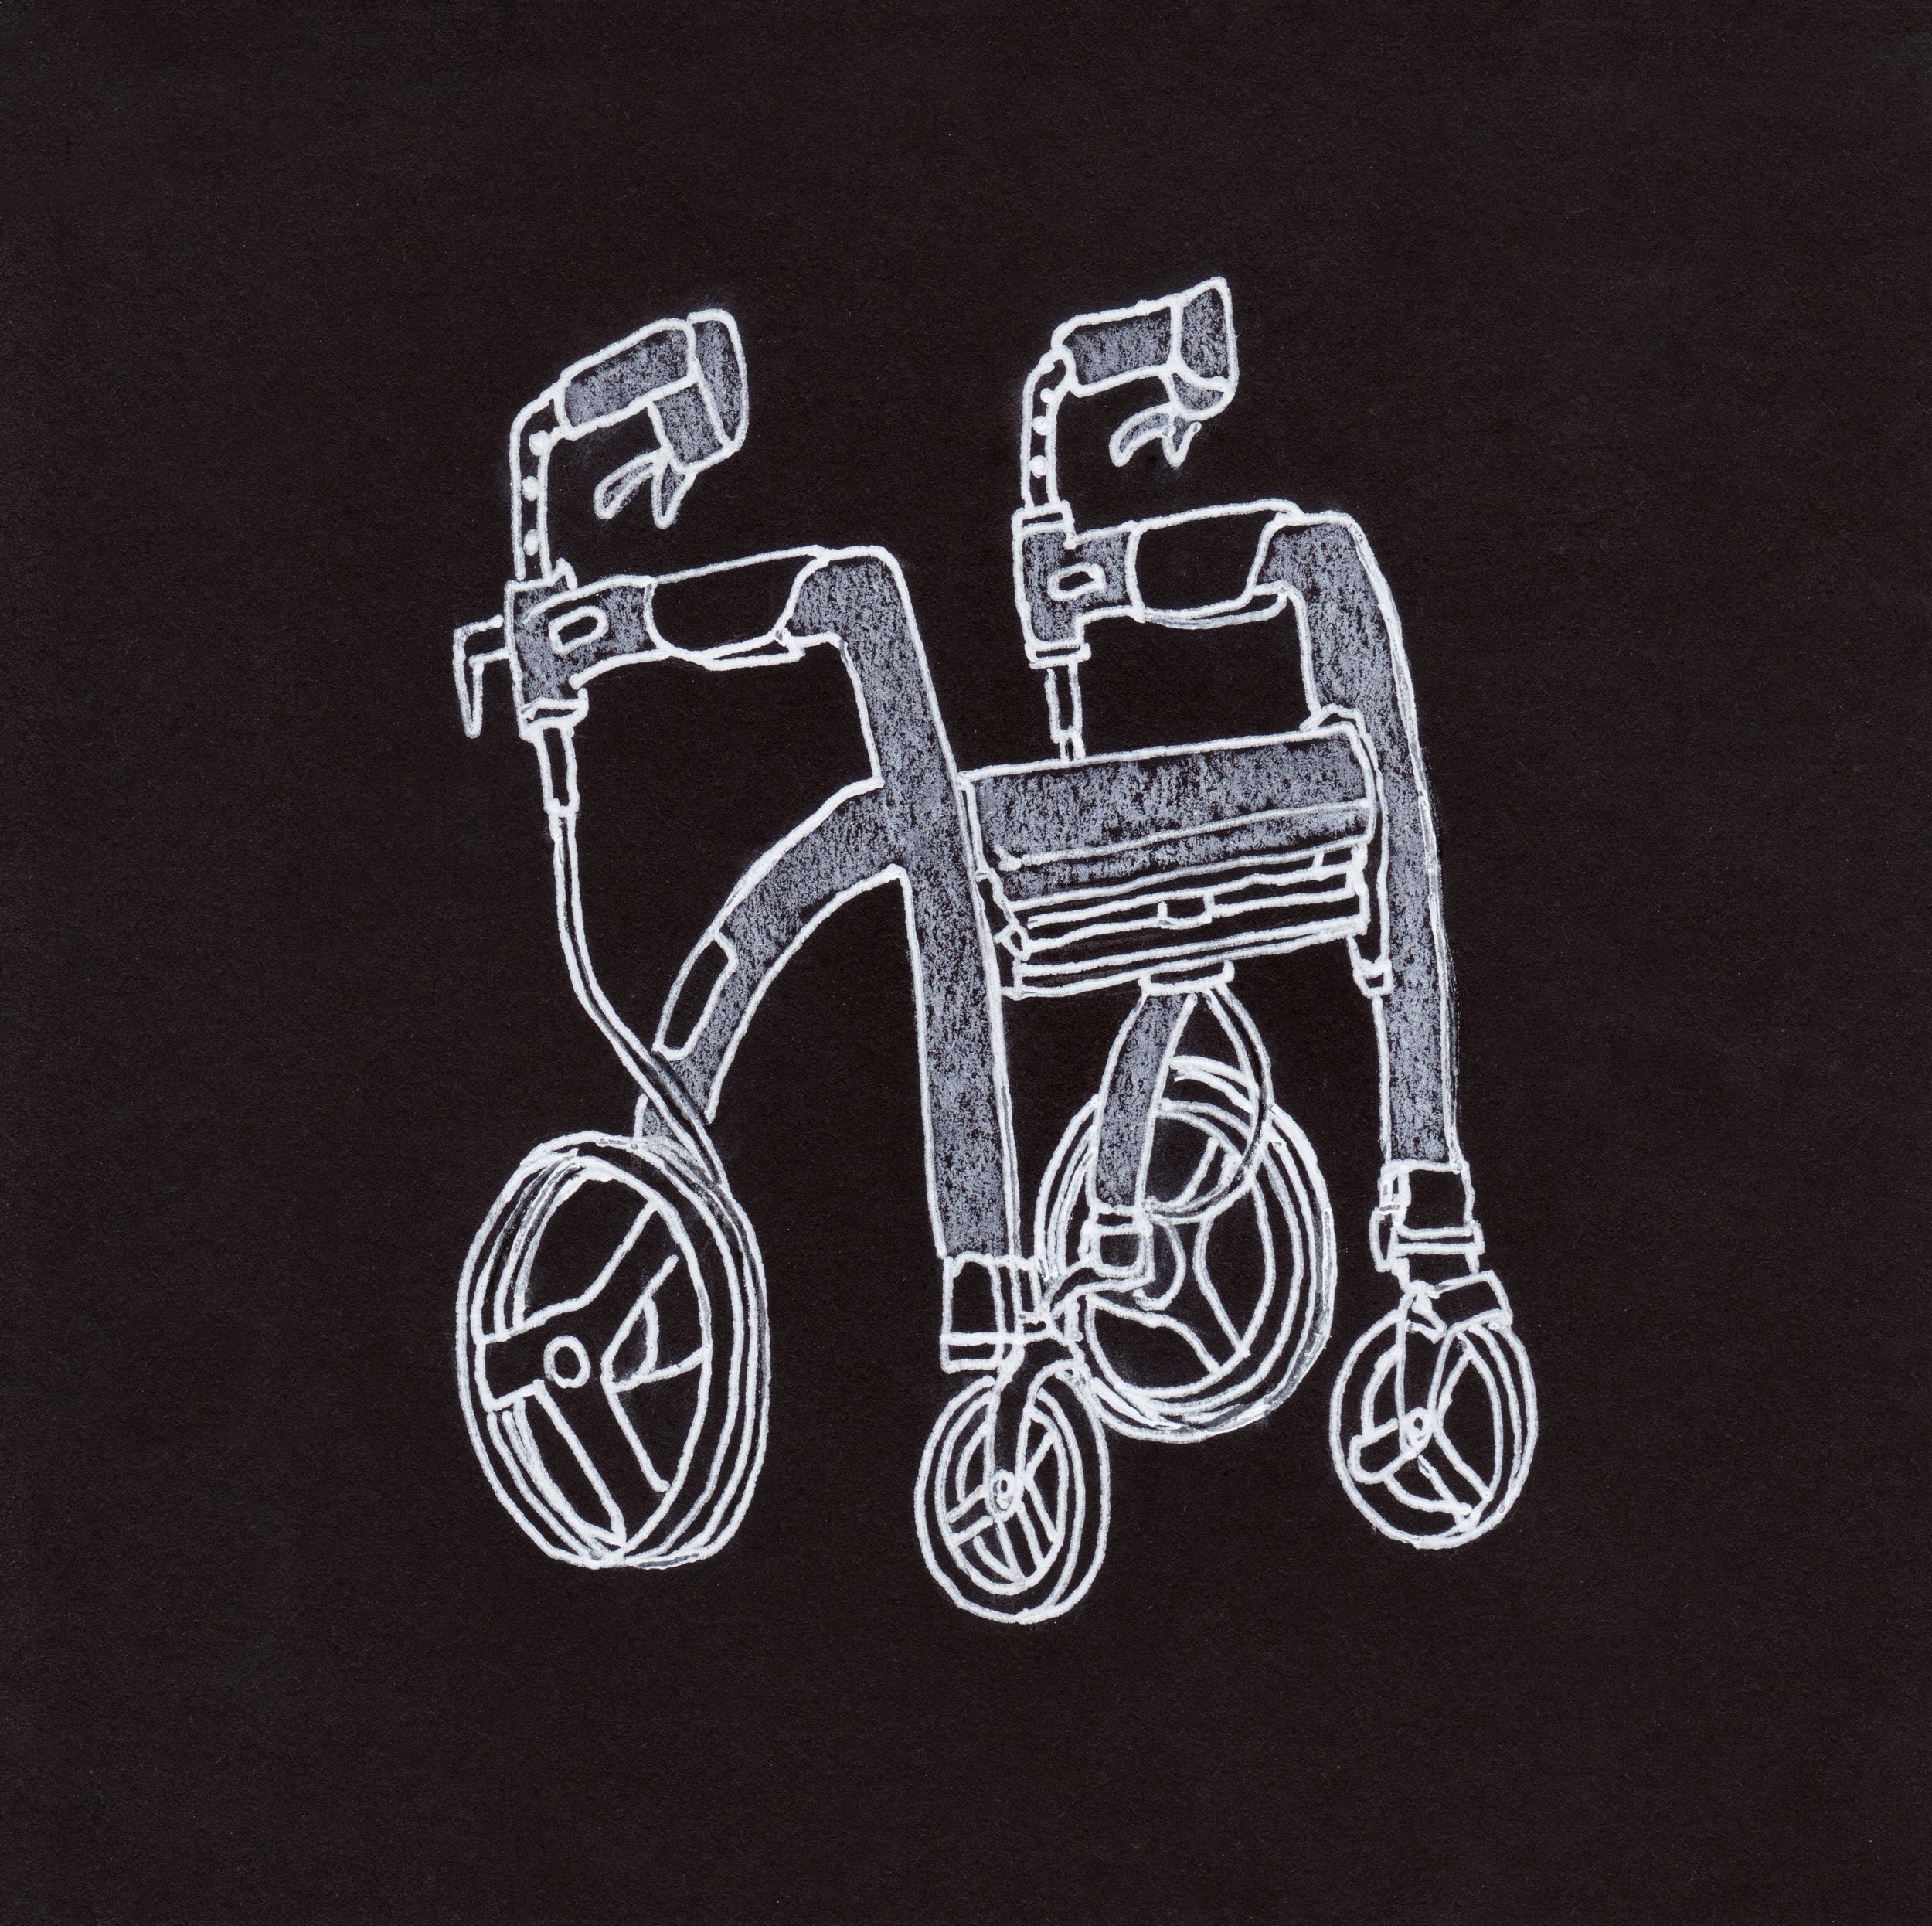 "R is for Rollator"